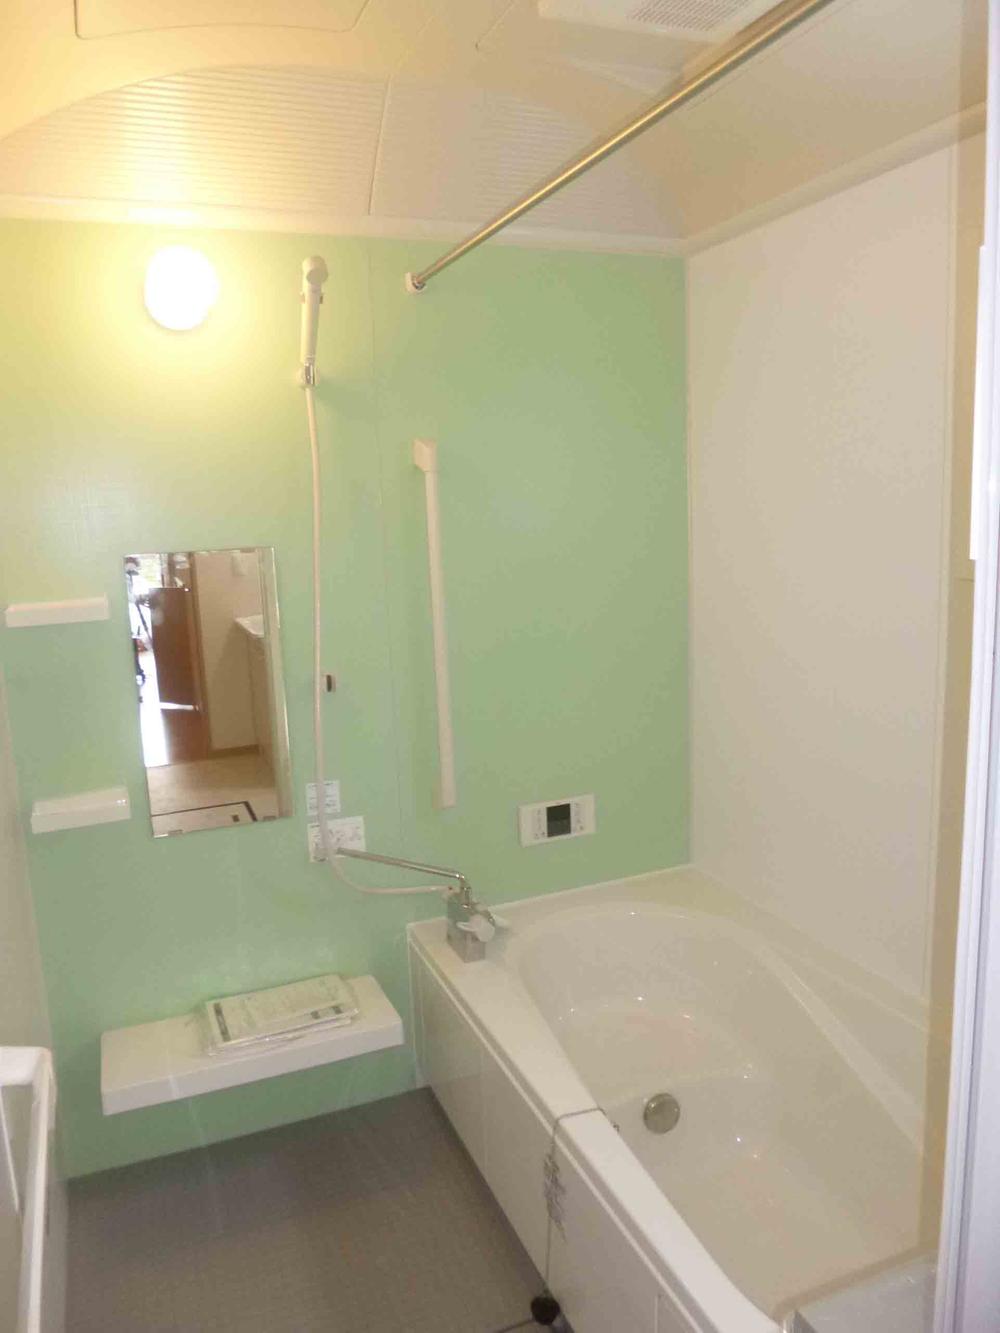 Same specifications photo (kitchen). Example of construction. With bathroom dryer